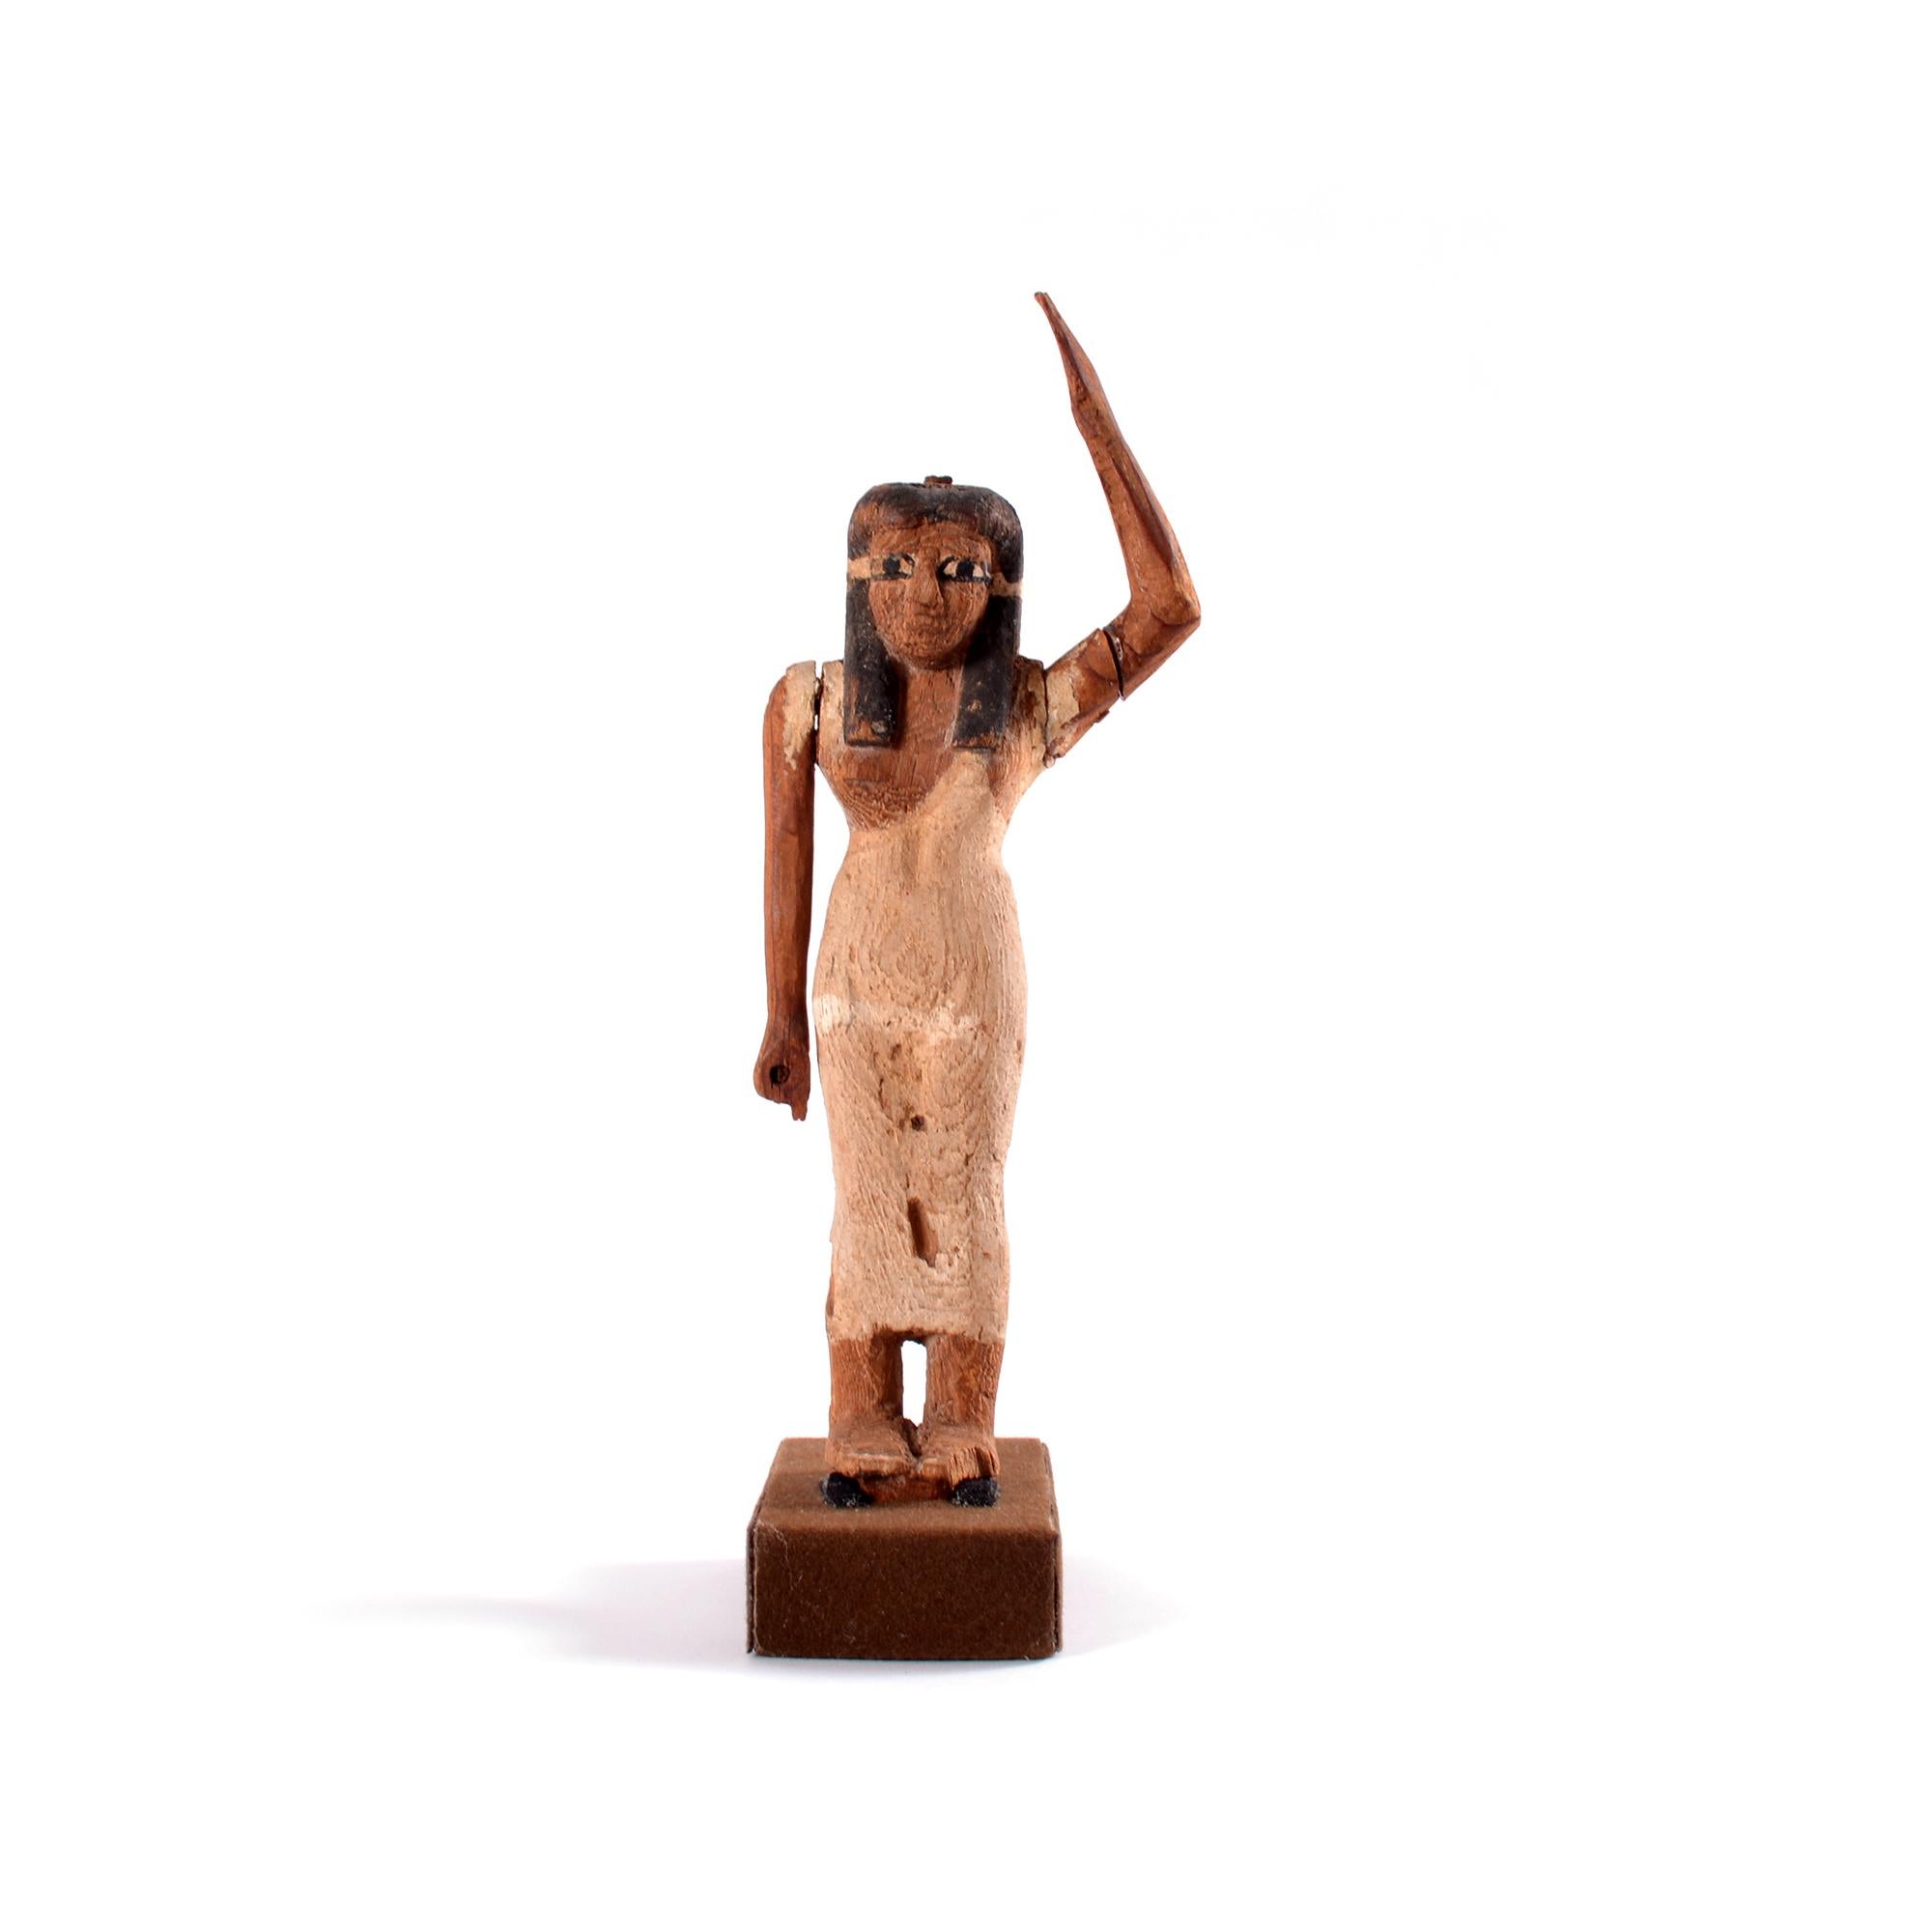 Standing female wearing a tight fitting white dress and black tripartite wig, serene facial features with large painted eyes. Separately made arms attached with dowel to the shoulder, left arm raised and brought back to support the basket of